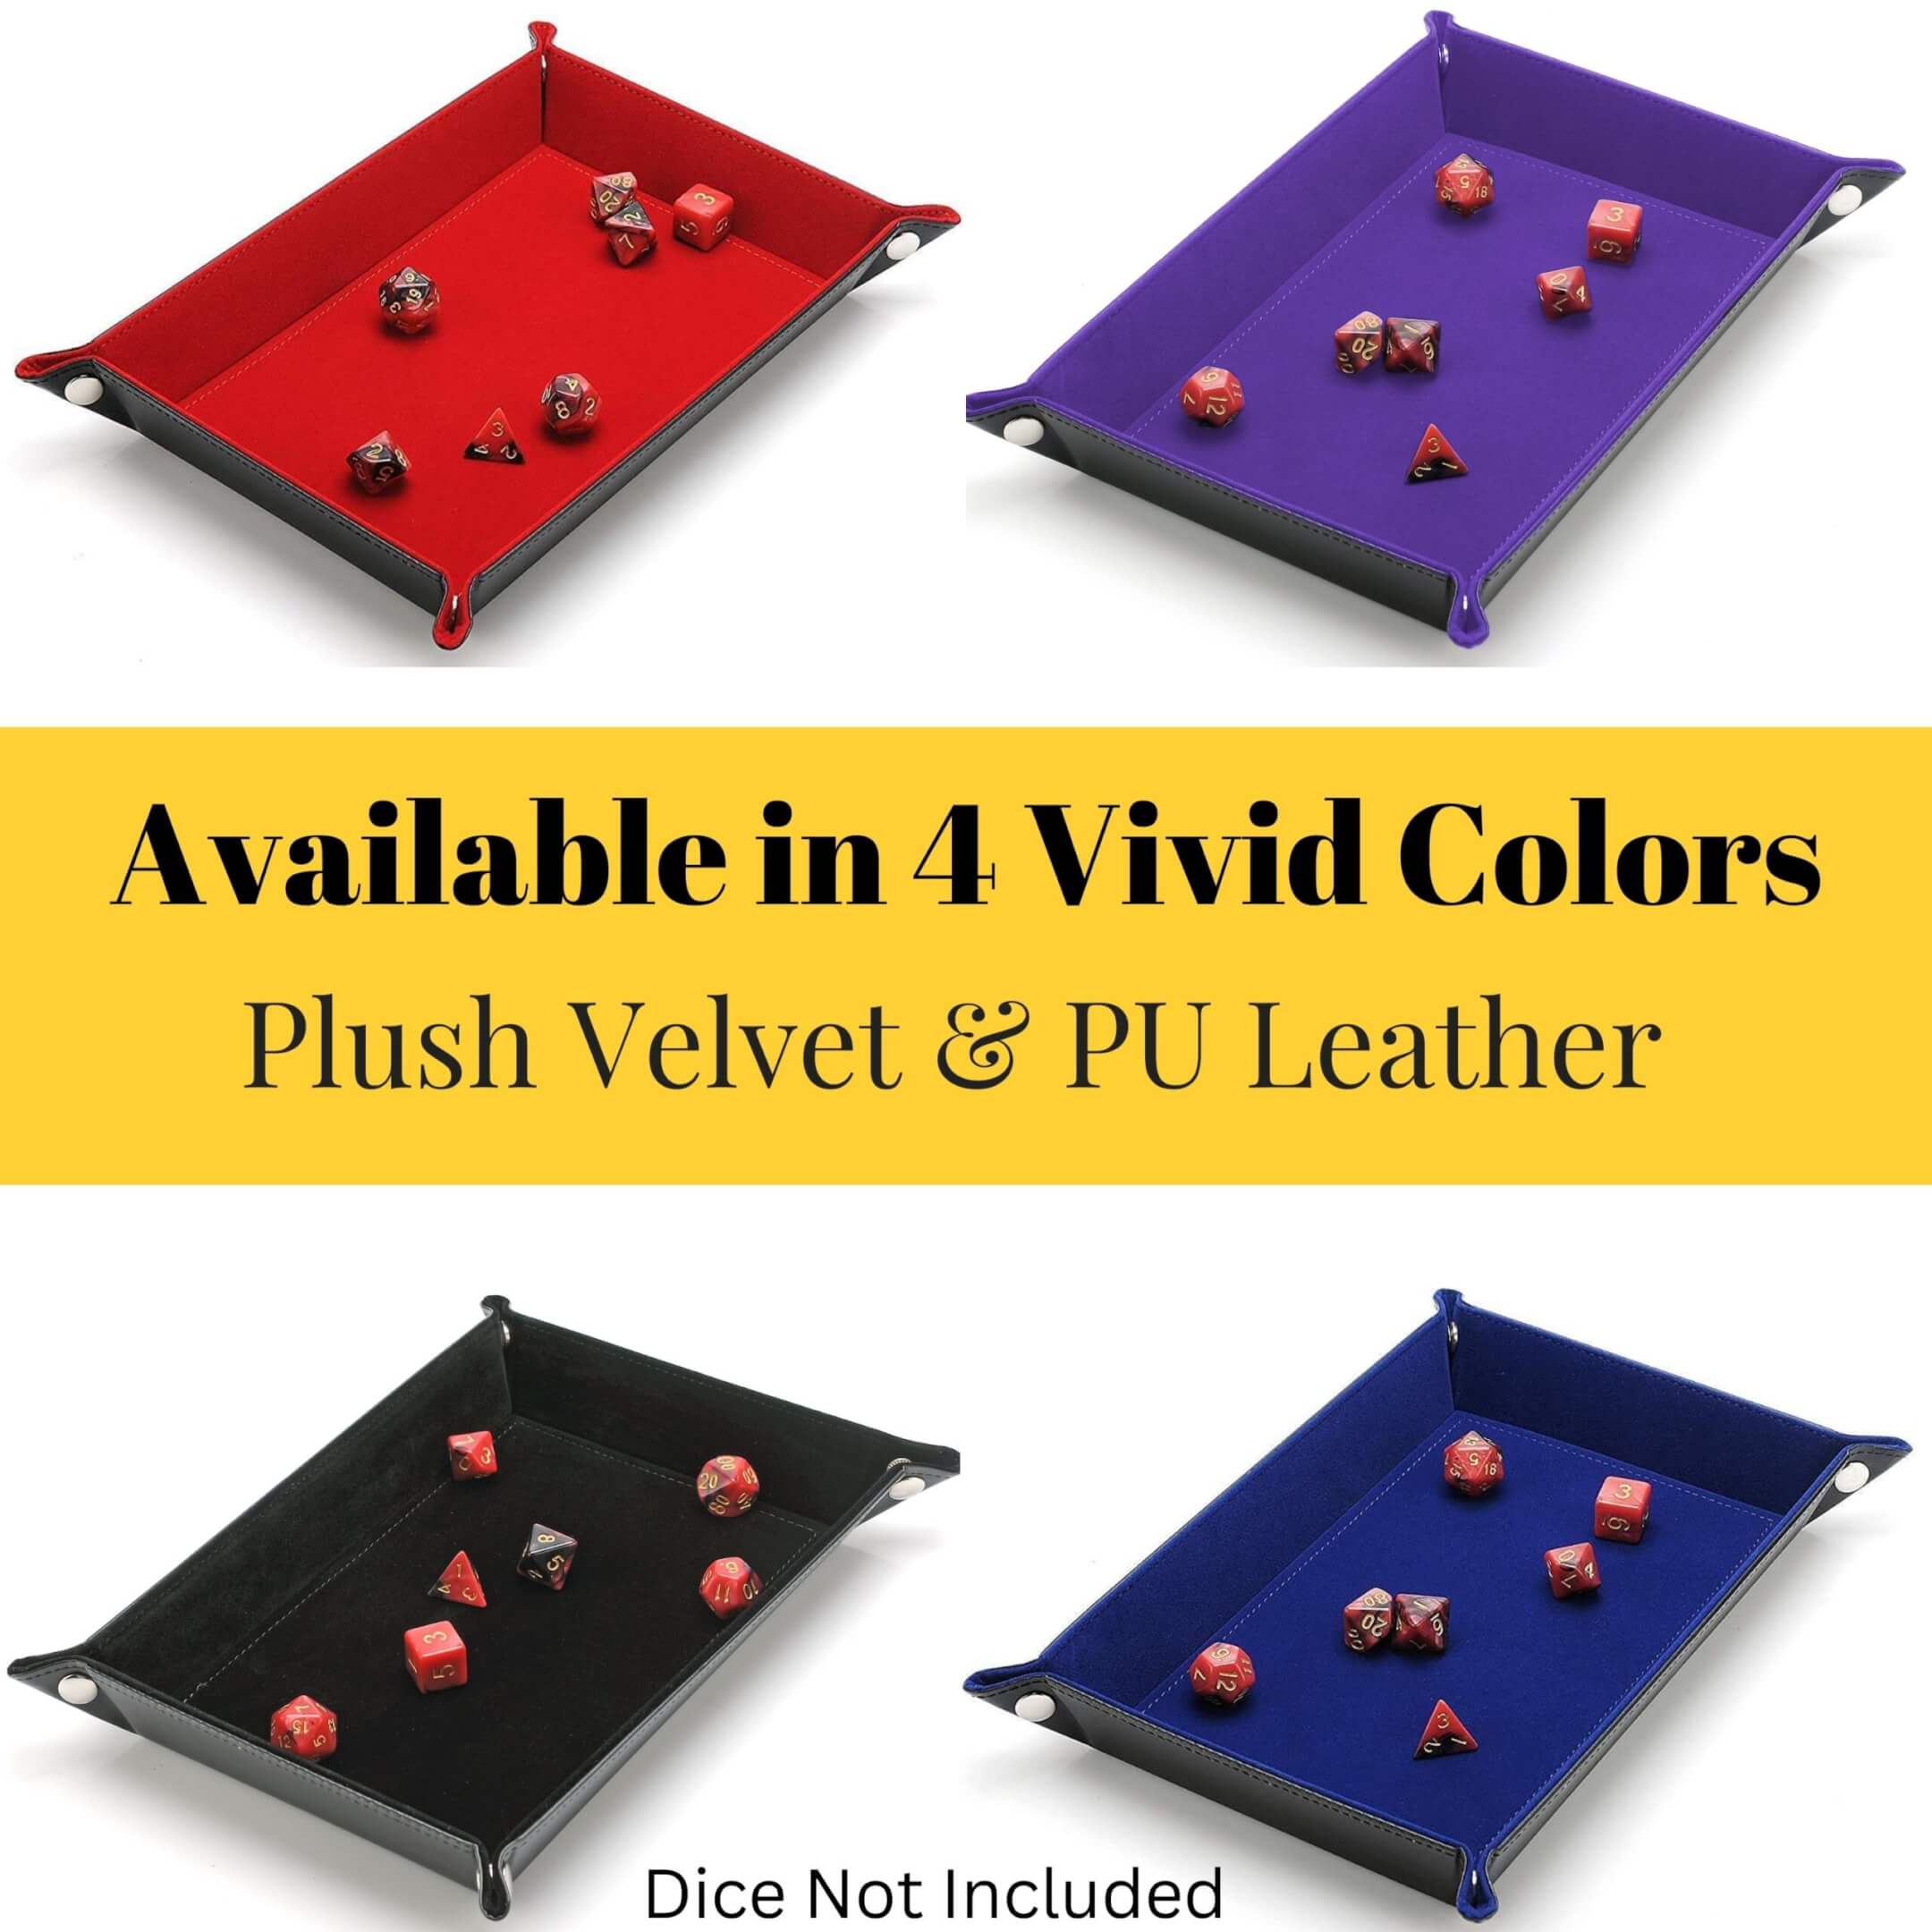 Available in 4 Vivid Colors